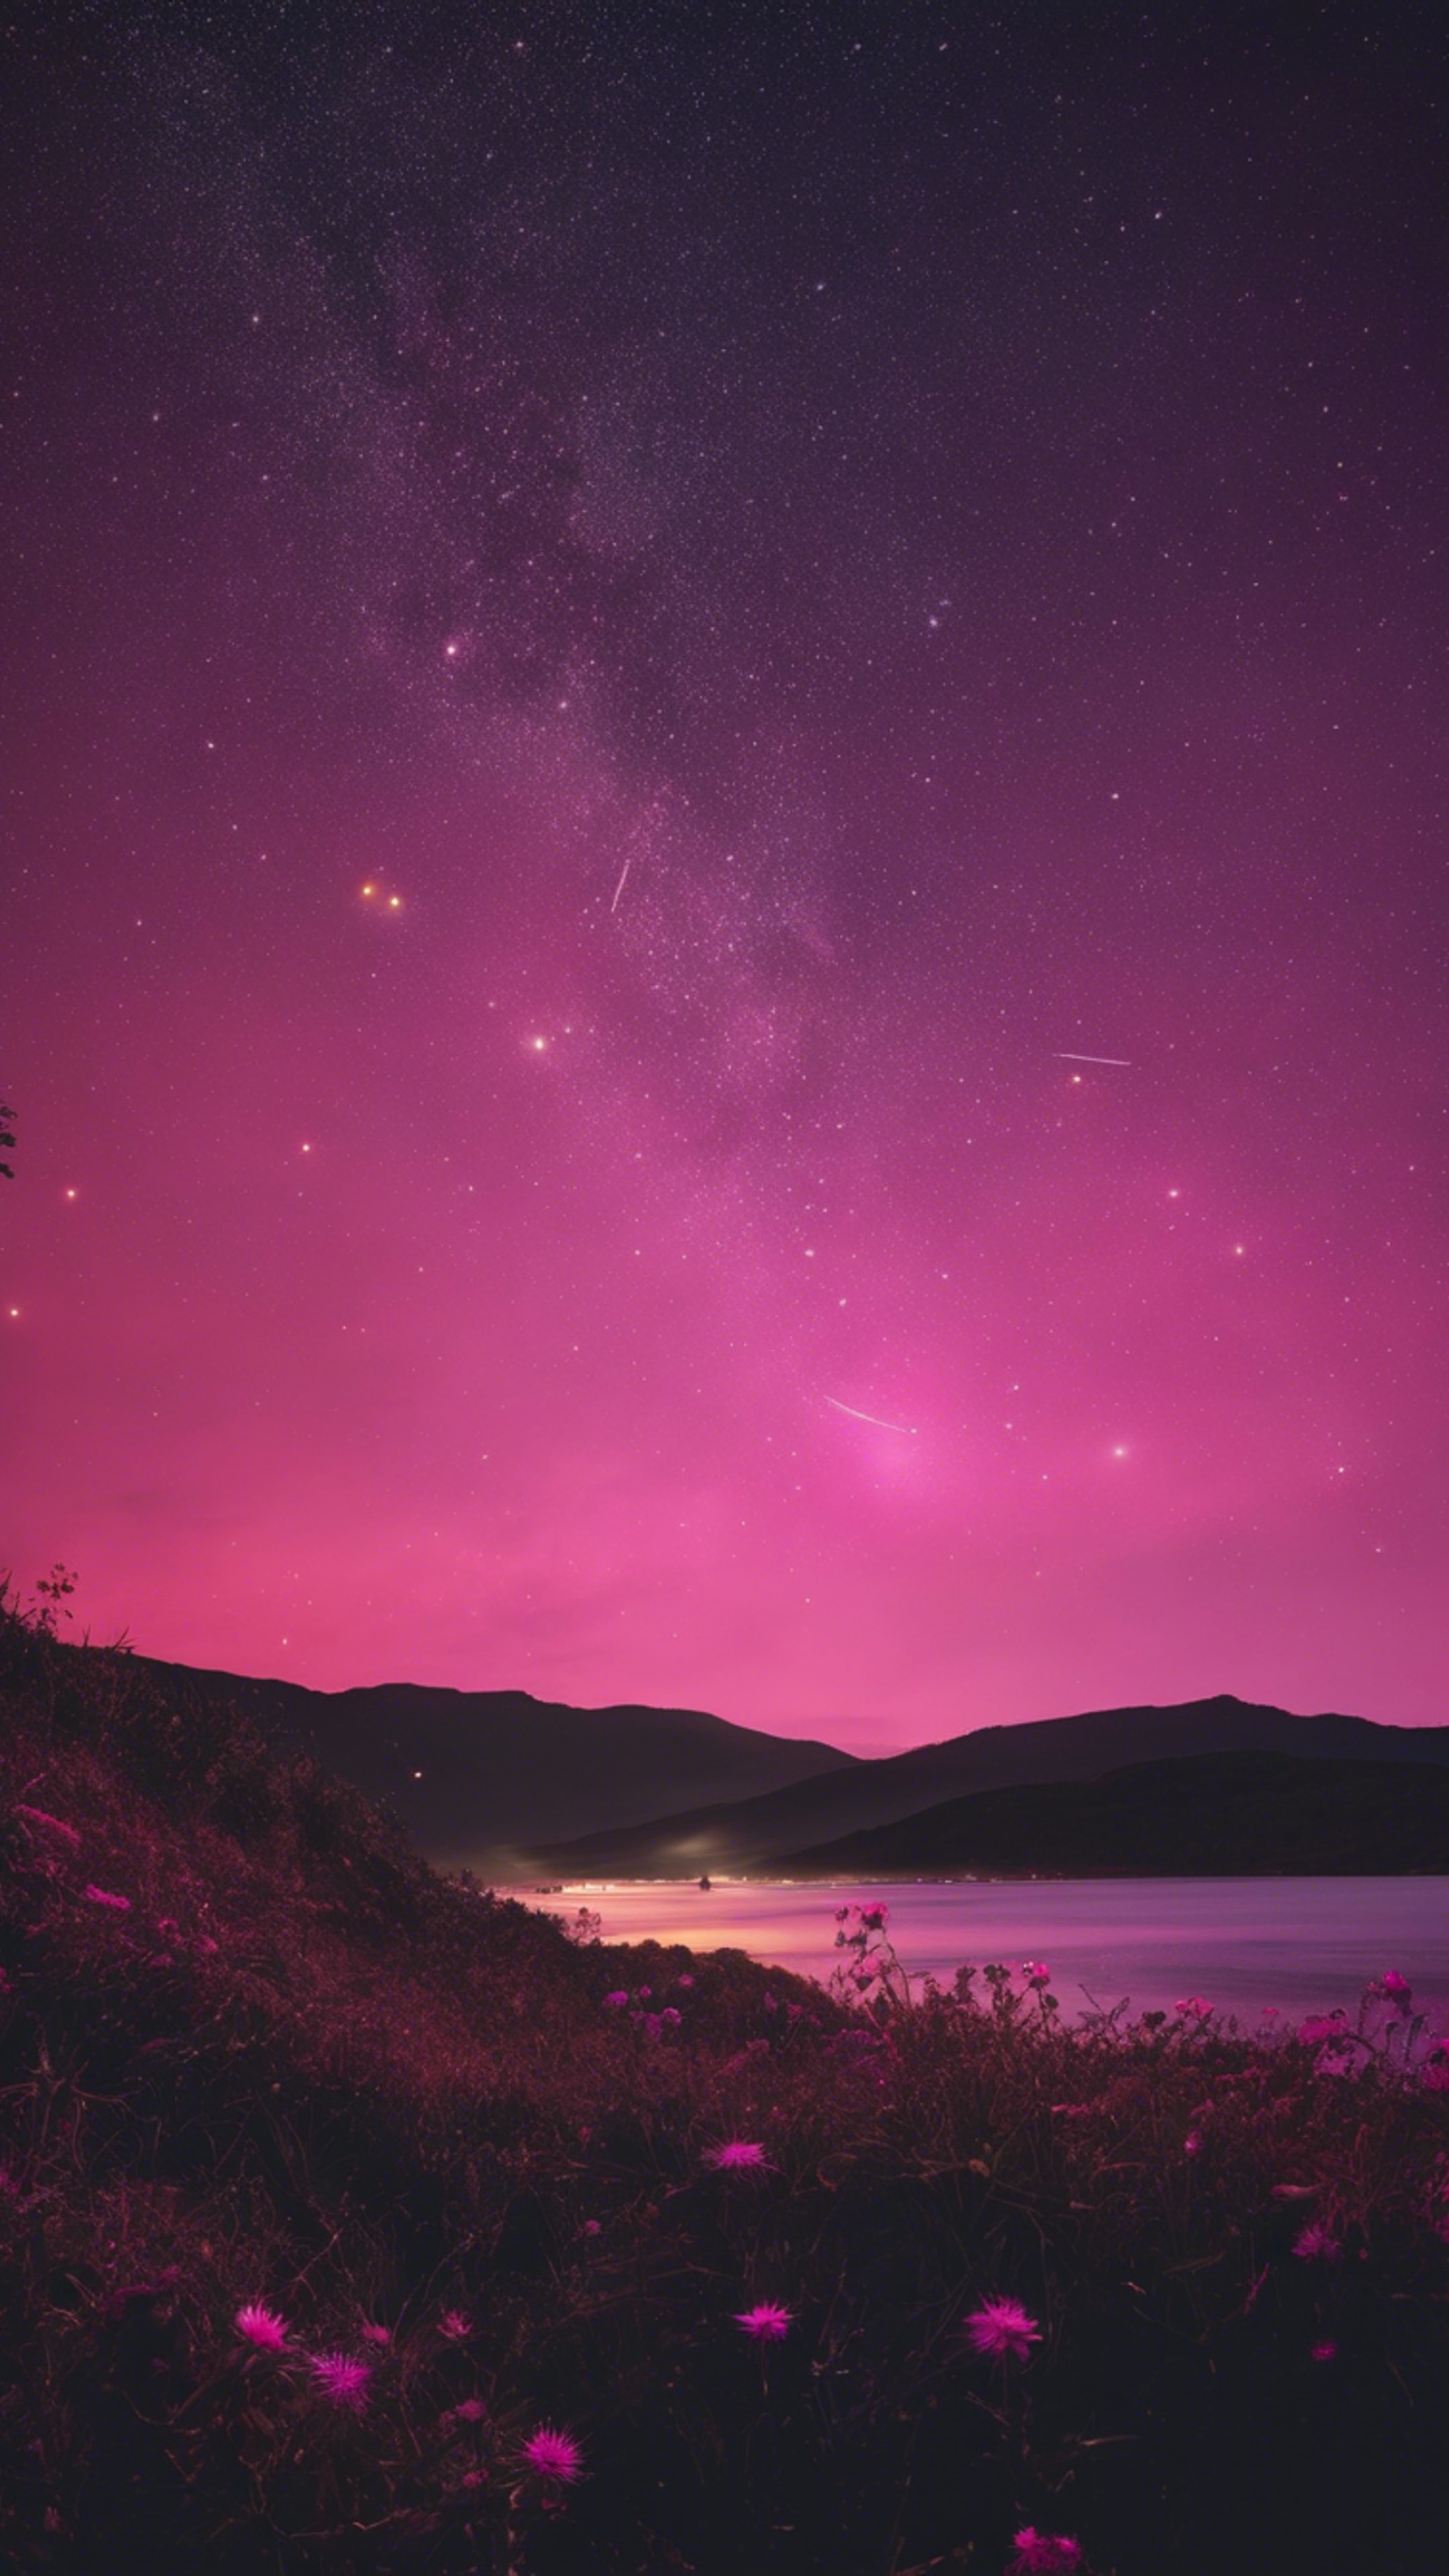 A shooting star glowing in a vibrant pink as it crosses the dark night sky. Шпалери[c8fce7a9134e4e29a83b]